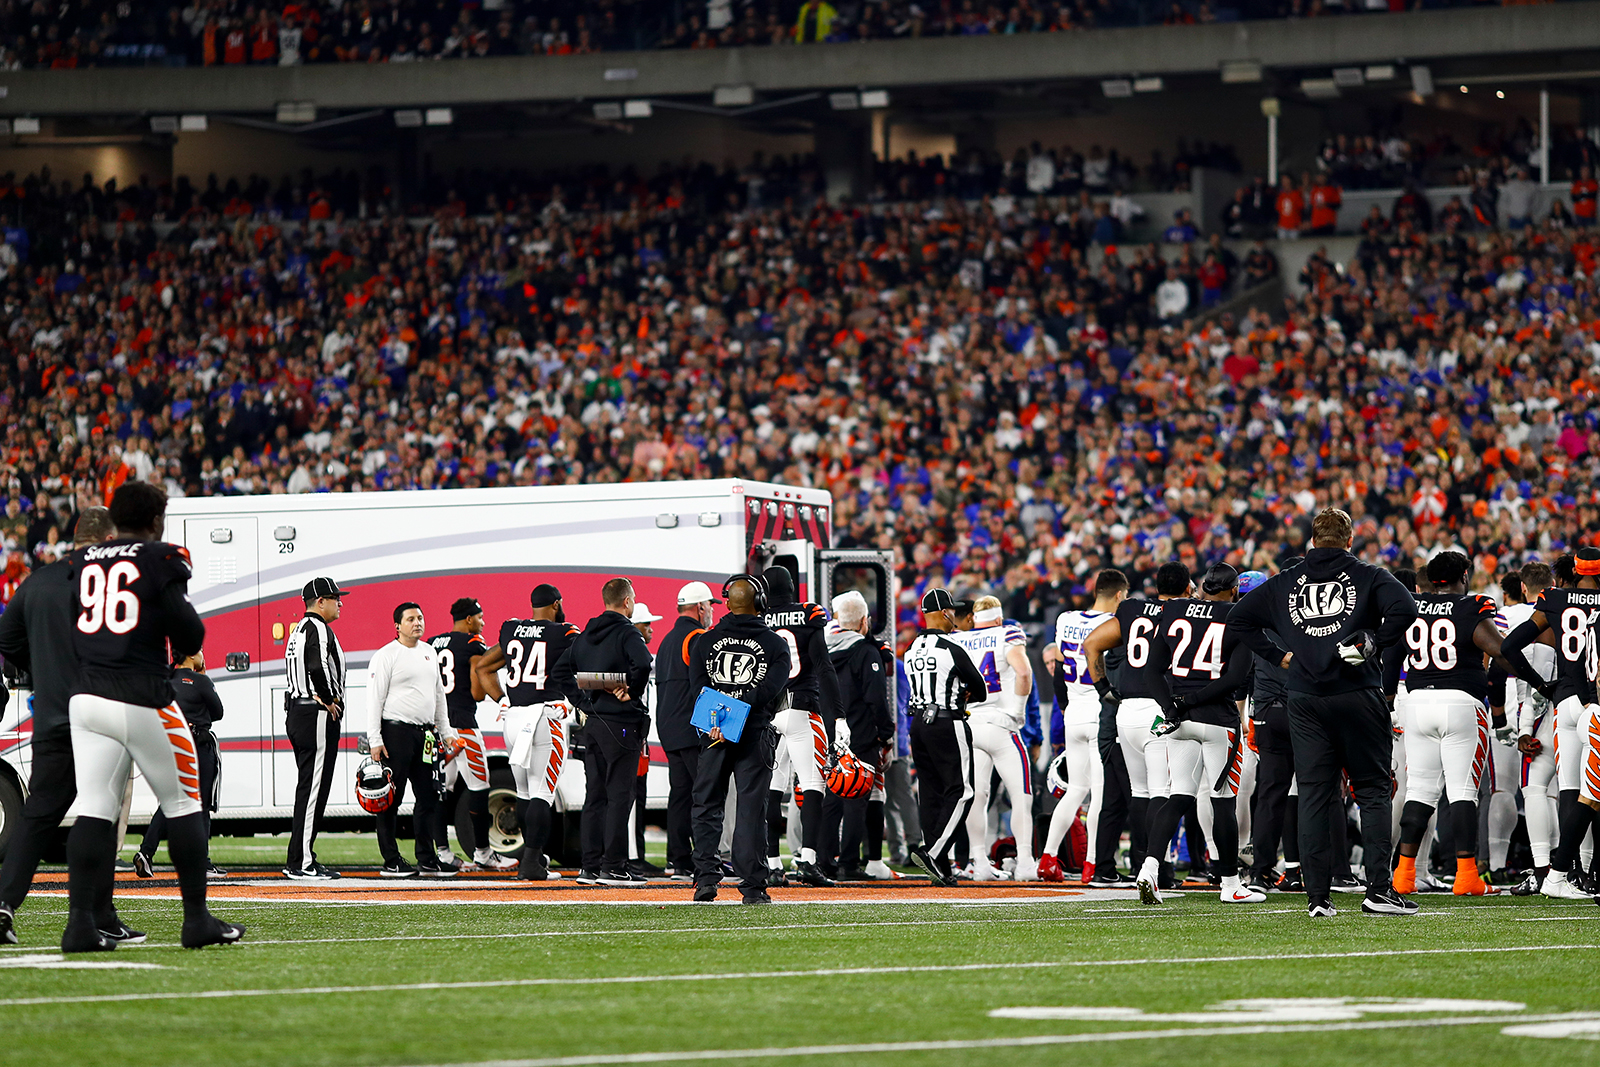 Buffalo Bills and Cincinnati Bengals players react to an injury sustained by safety Damar Hamlin (3) during the first quarter of an NFL game against the Cincinnati Bengals on Monday.